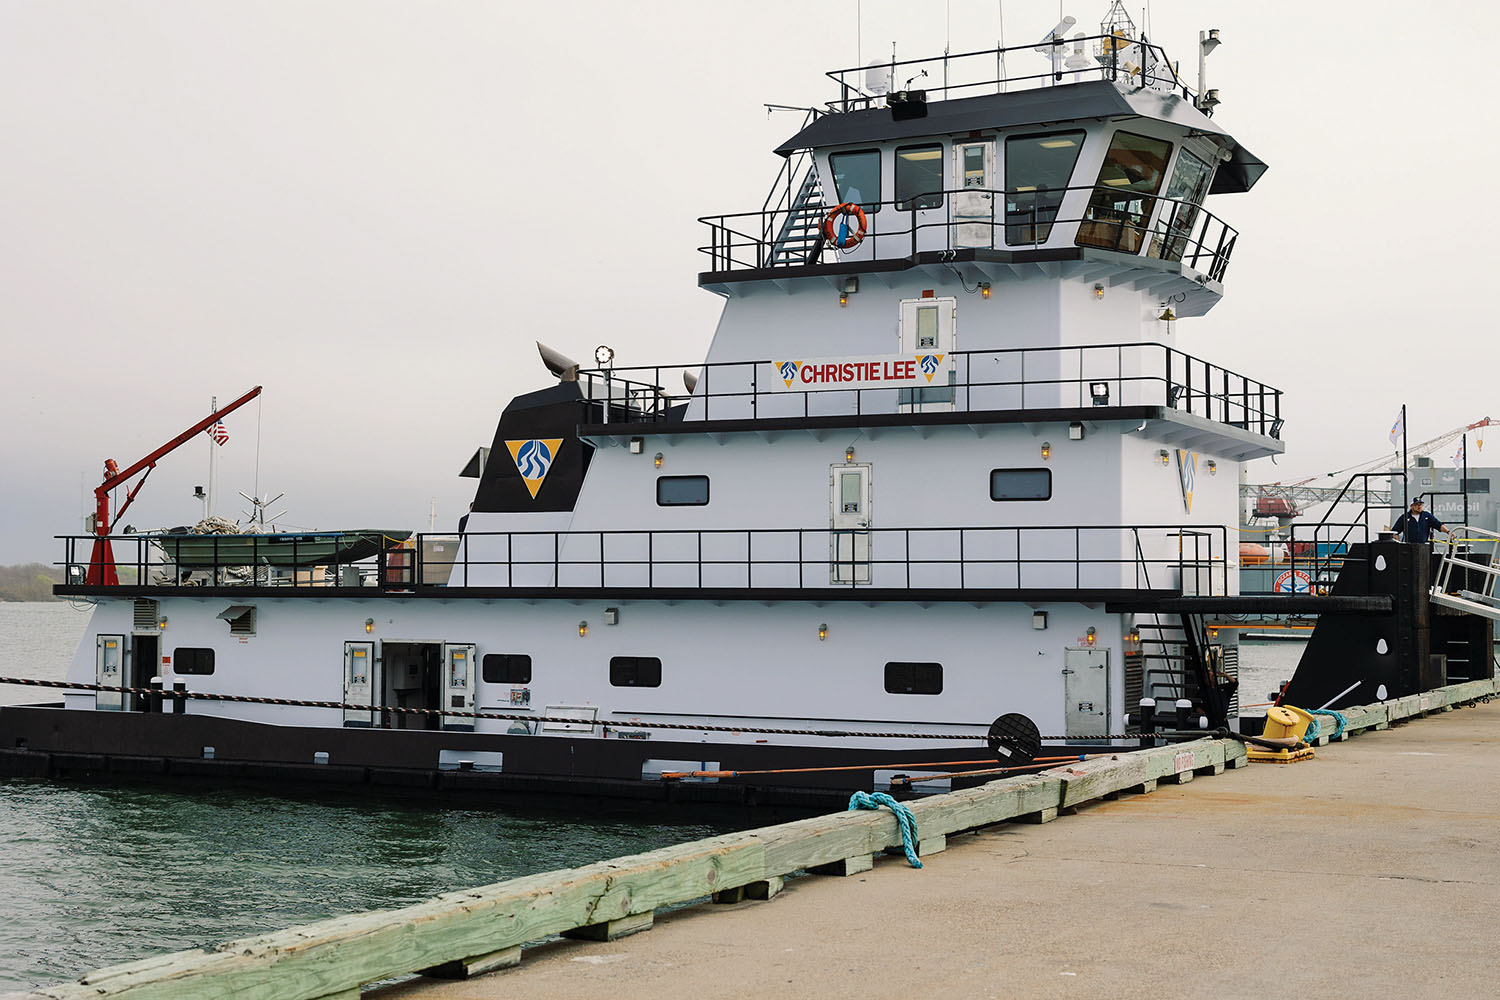 The 2,600 hp. mv. Christie Lee was built in 2015 by Sneed Shipbuilding. Campbell Transportation acquired it in 2023 as part of its purchase of the assets of NGL Marine.